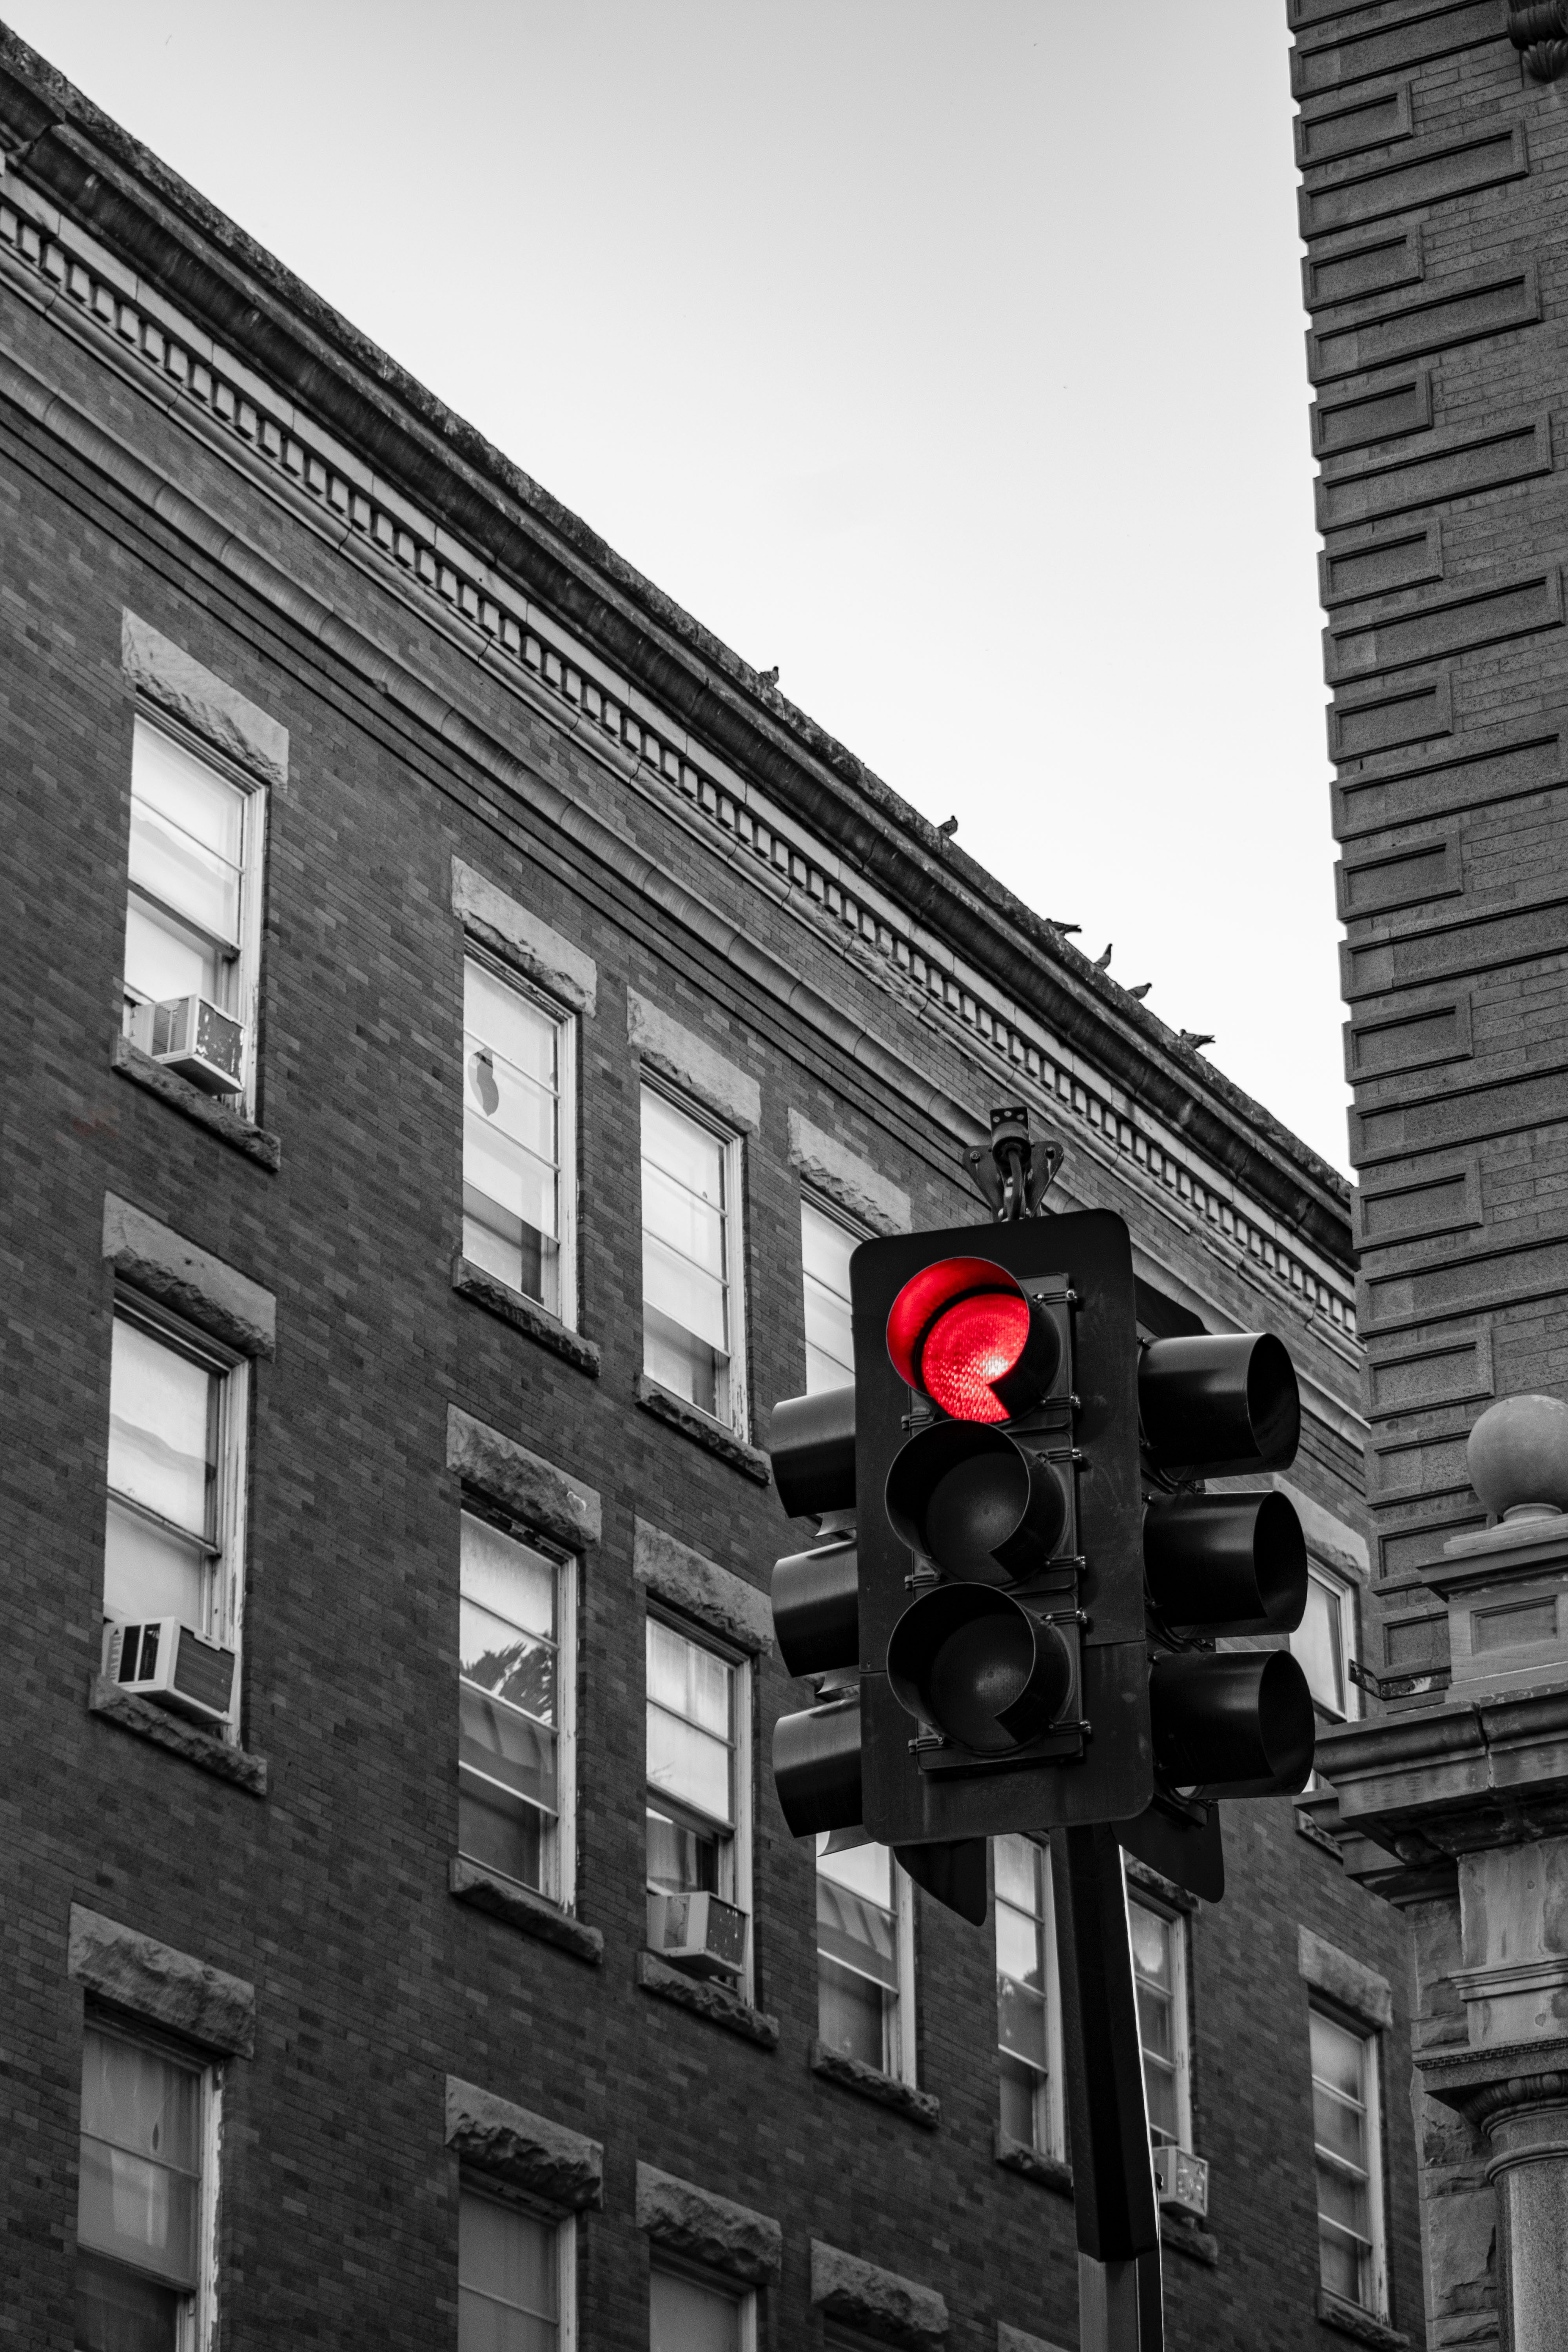 android traffic light, red, city, building, miscellanea, miscellaneous, glow